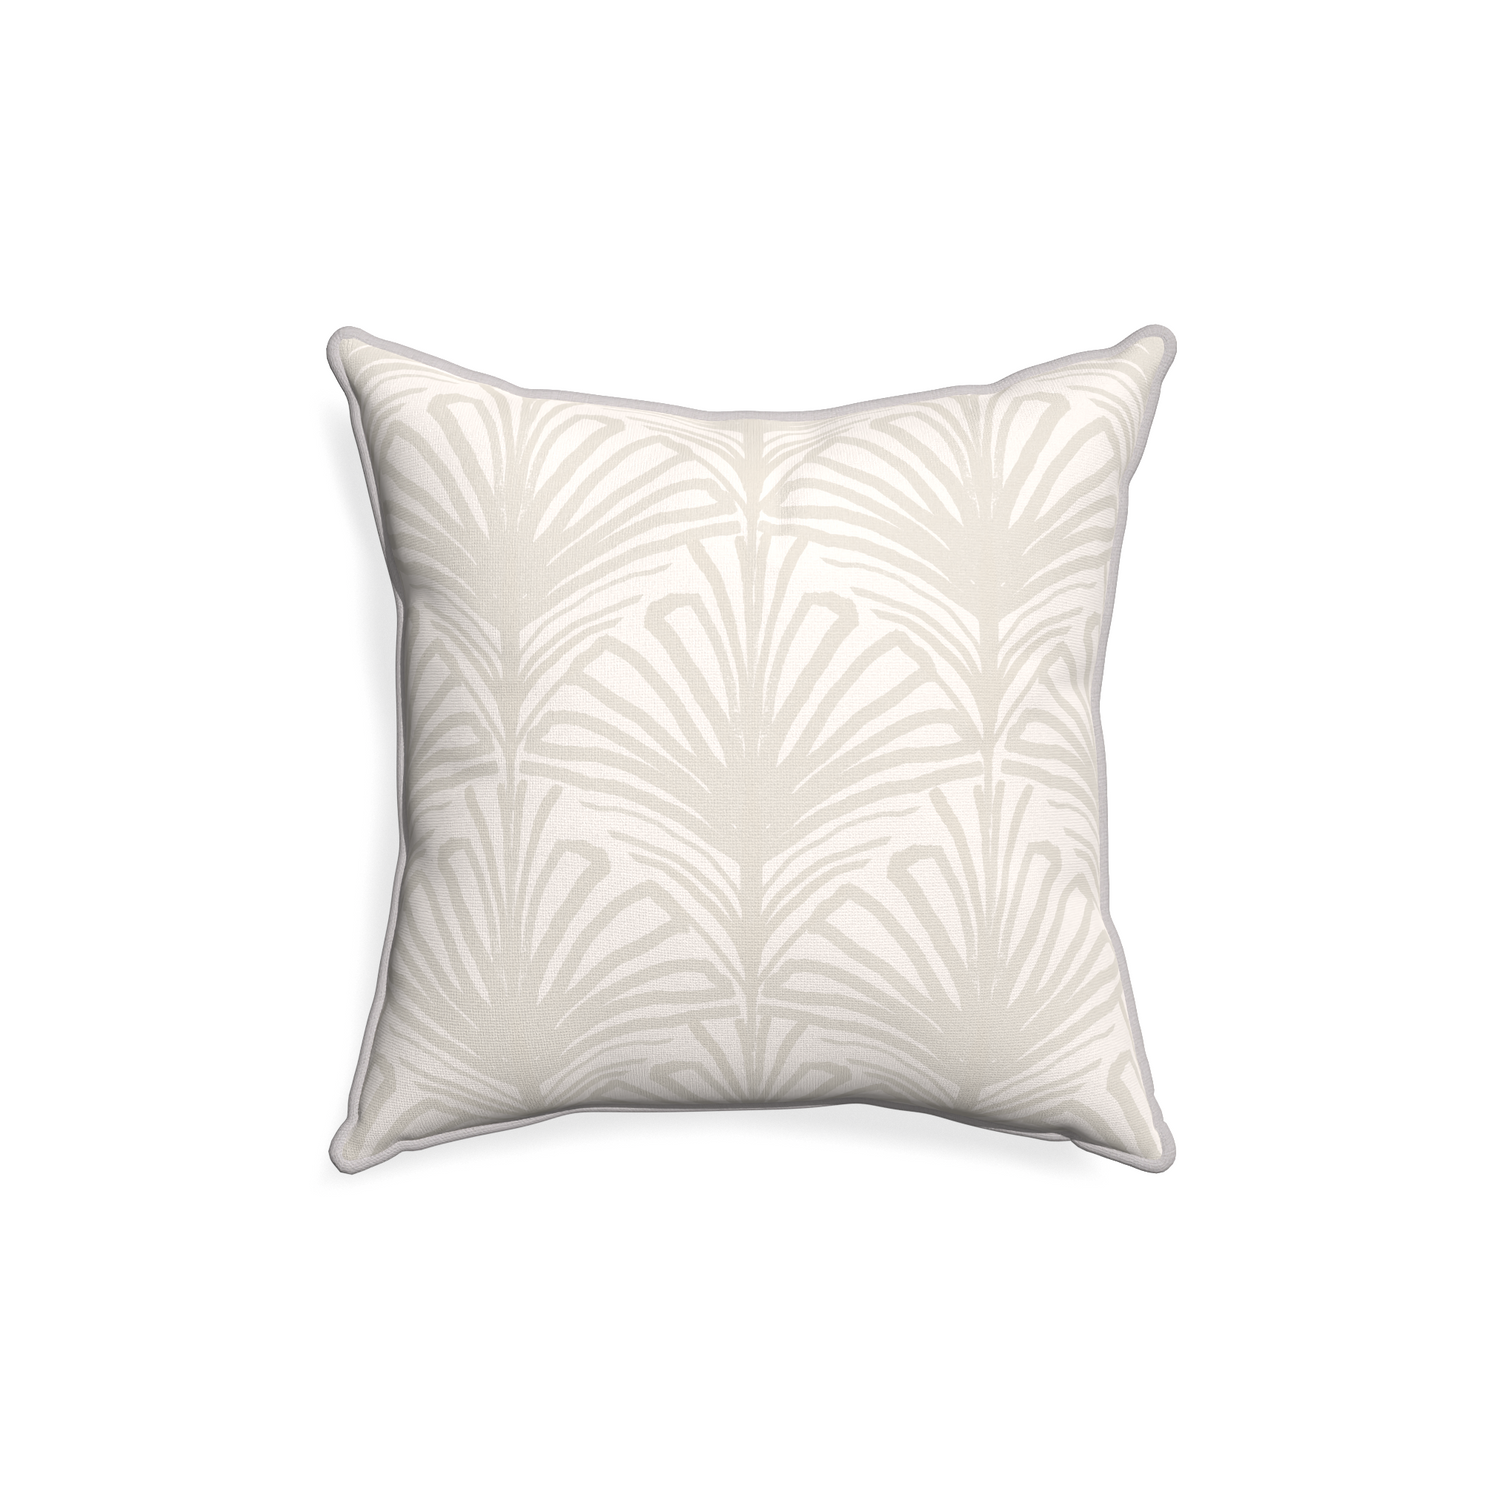 18-square suzy sand custom pillow with pebble piping on white background